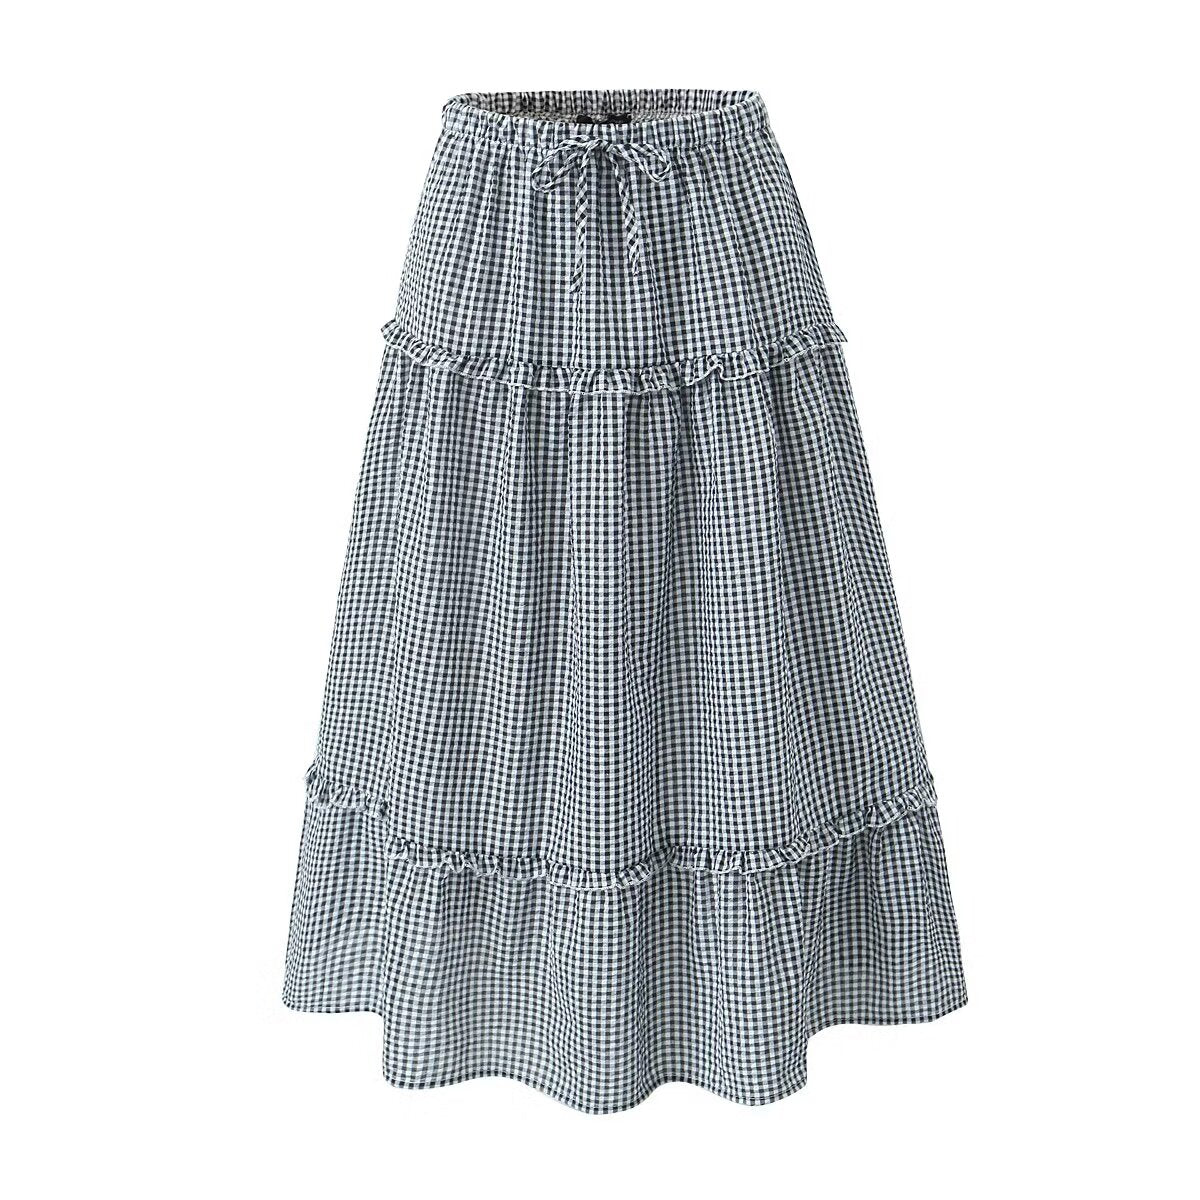 2 Piece: Plaid Pullover Lace Strap Top Drawstring A line Skirt Set